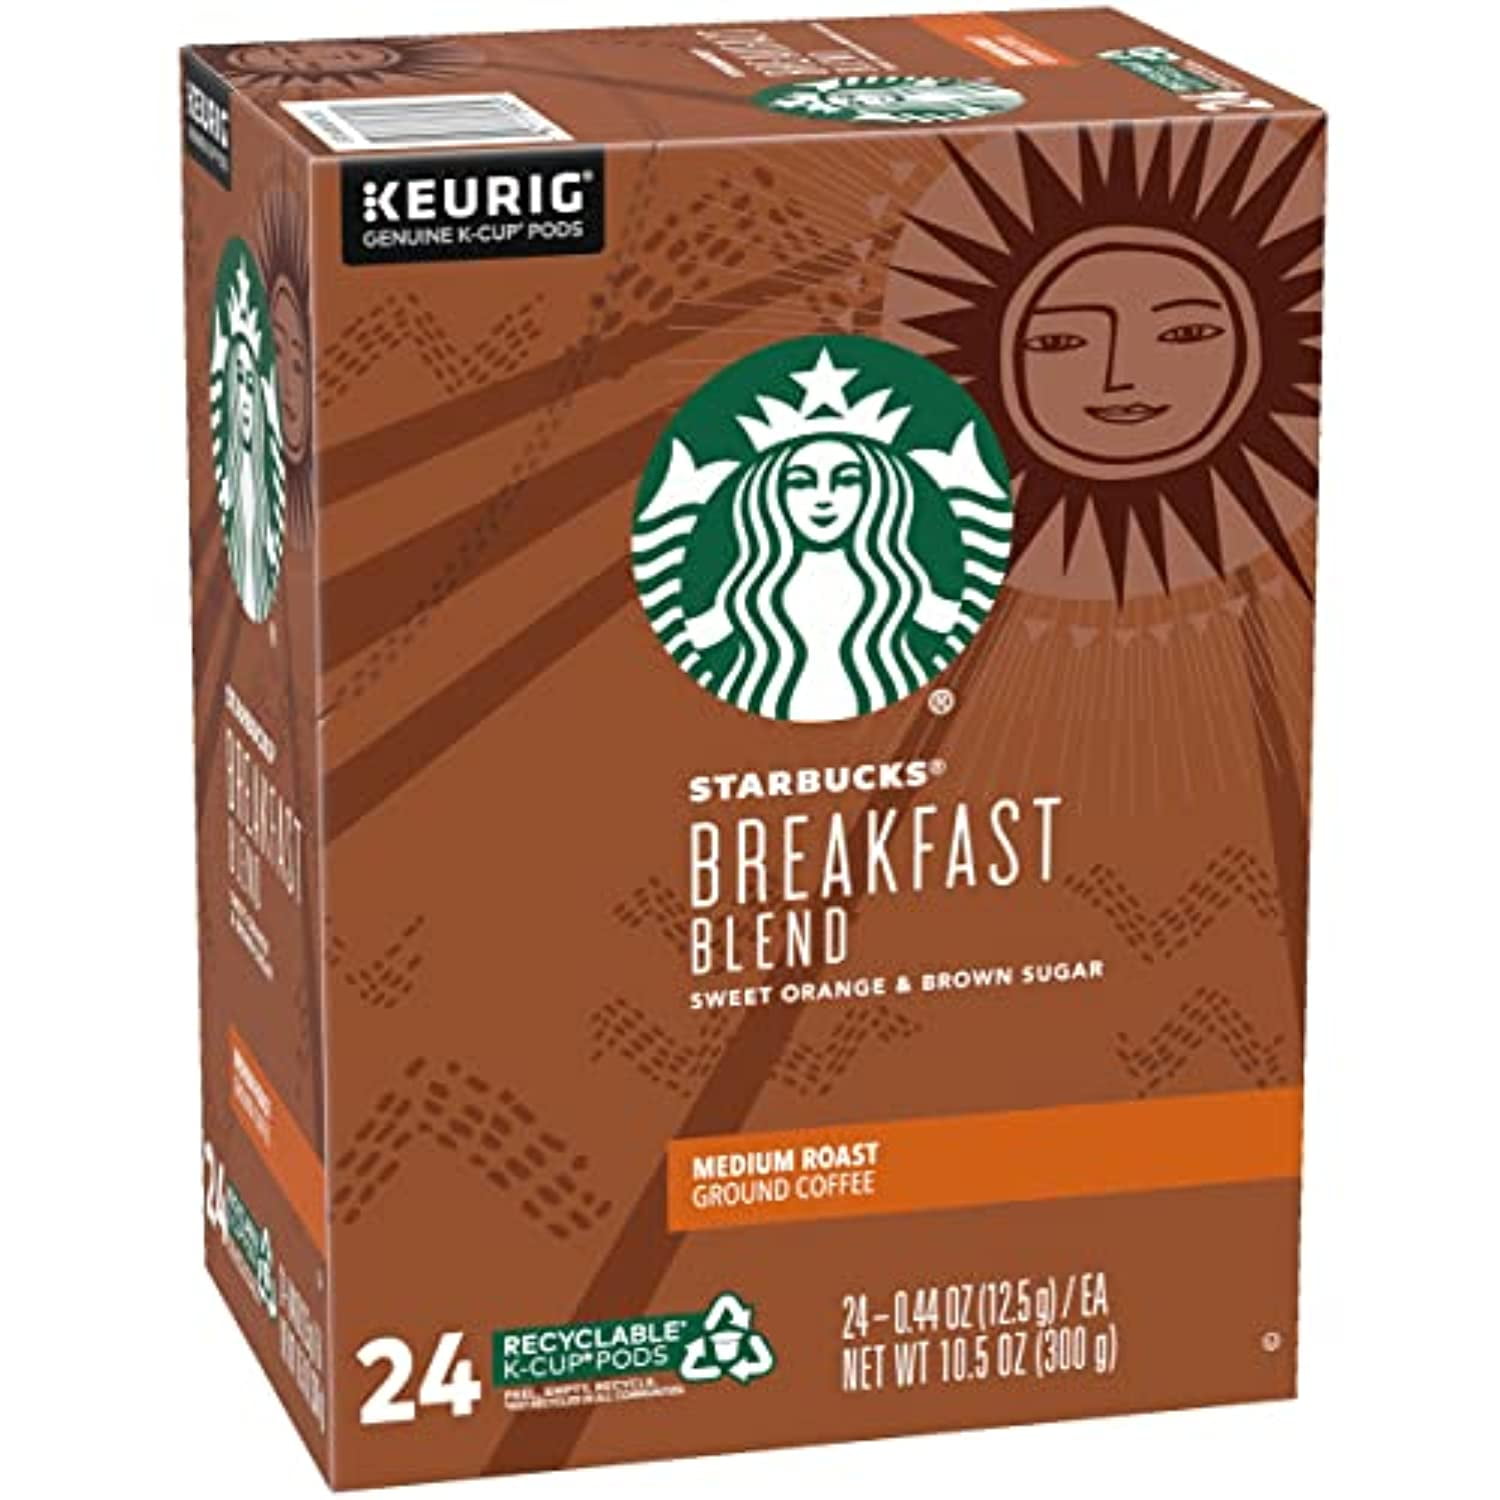 Free Starbucks K-Cup, Grocery Deals, Granola Recipe and More - One